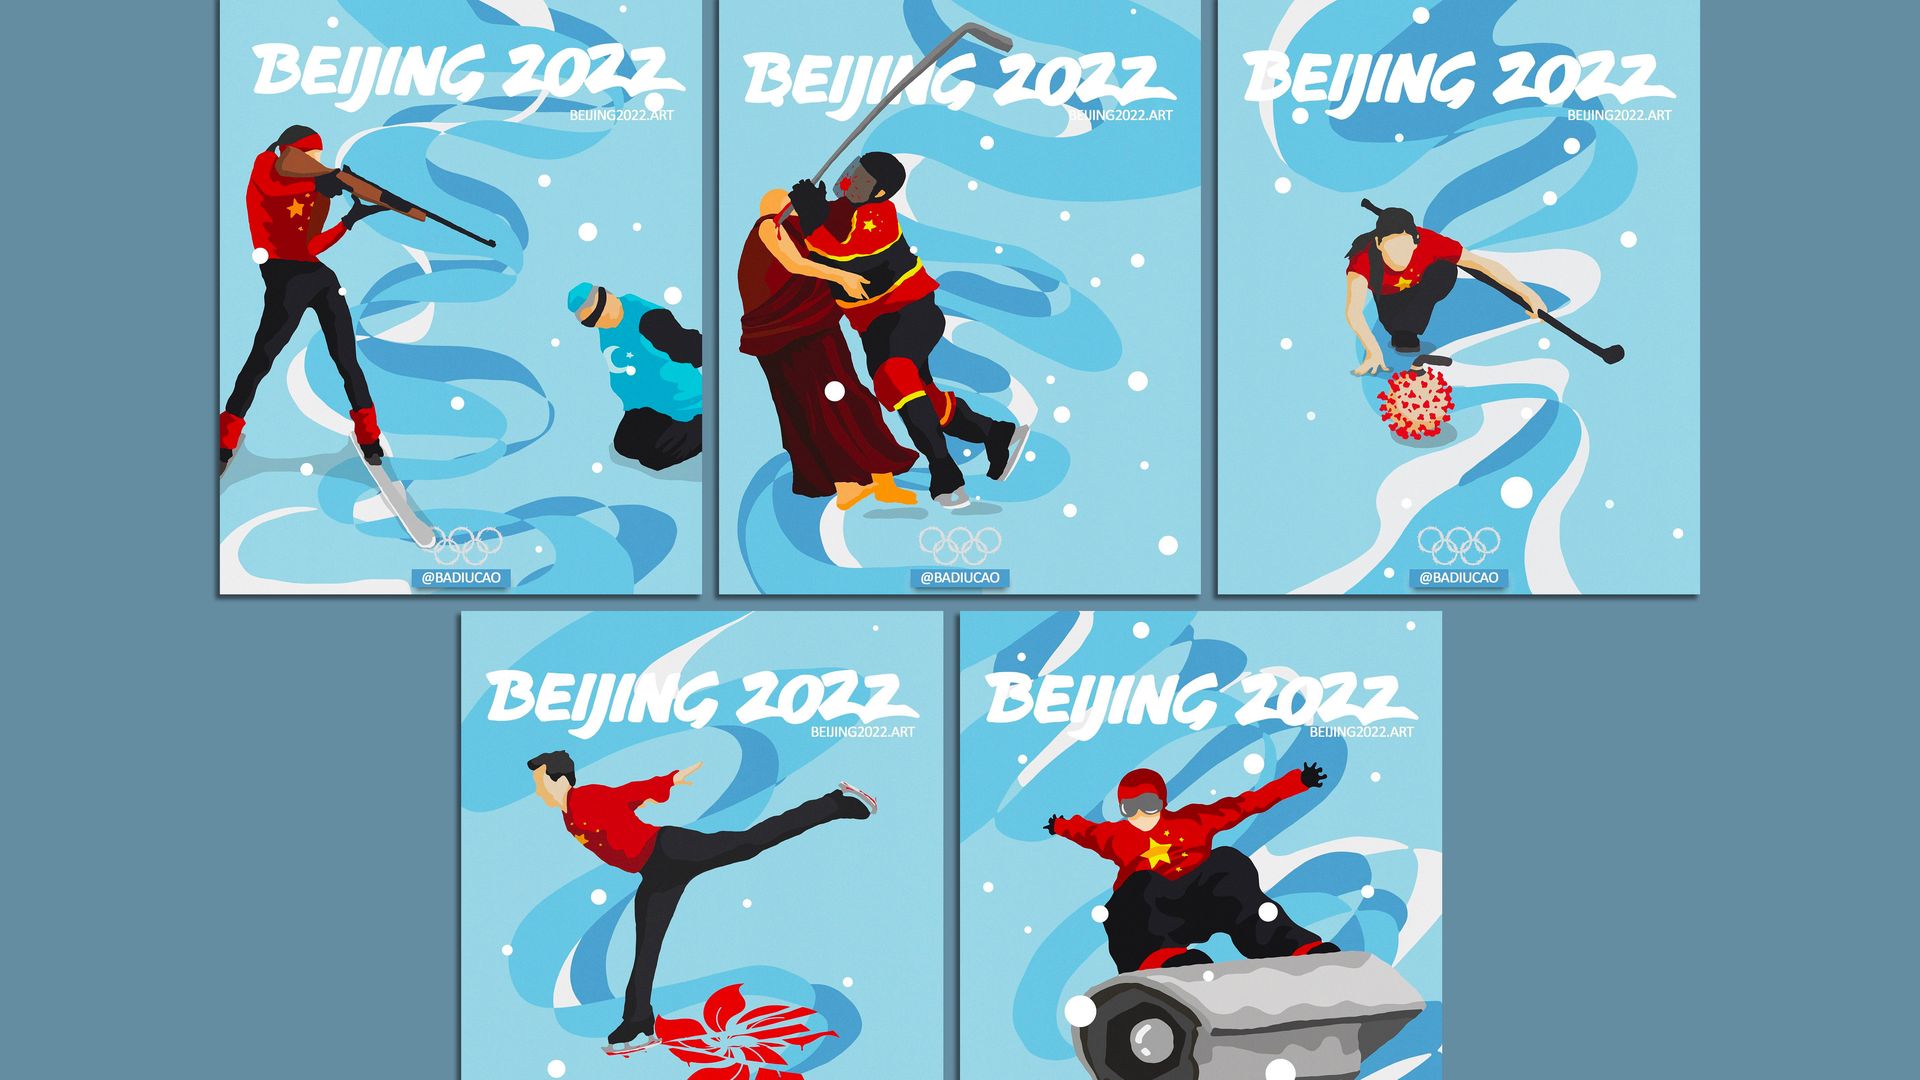 Olympic protest posters by Chinese-Australian artist Badiucao